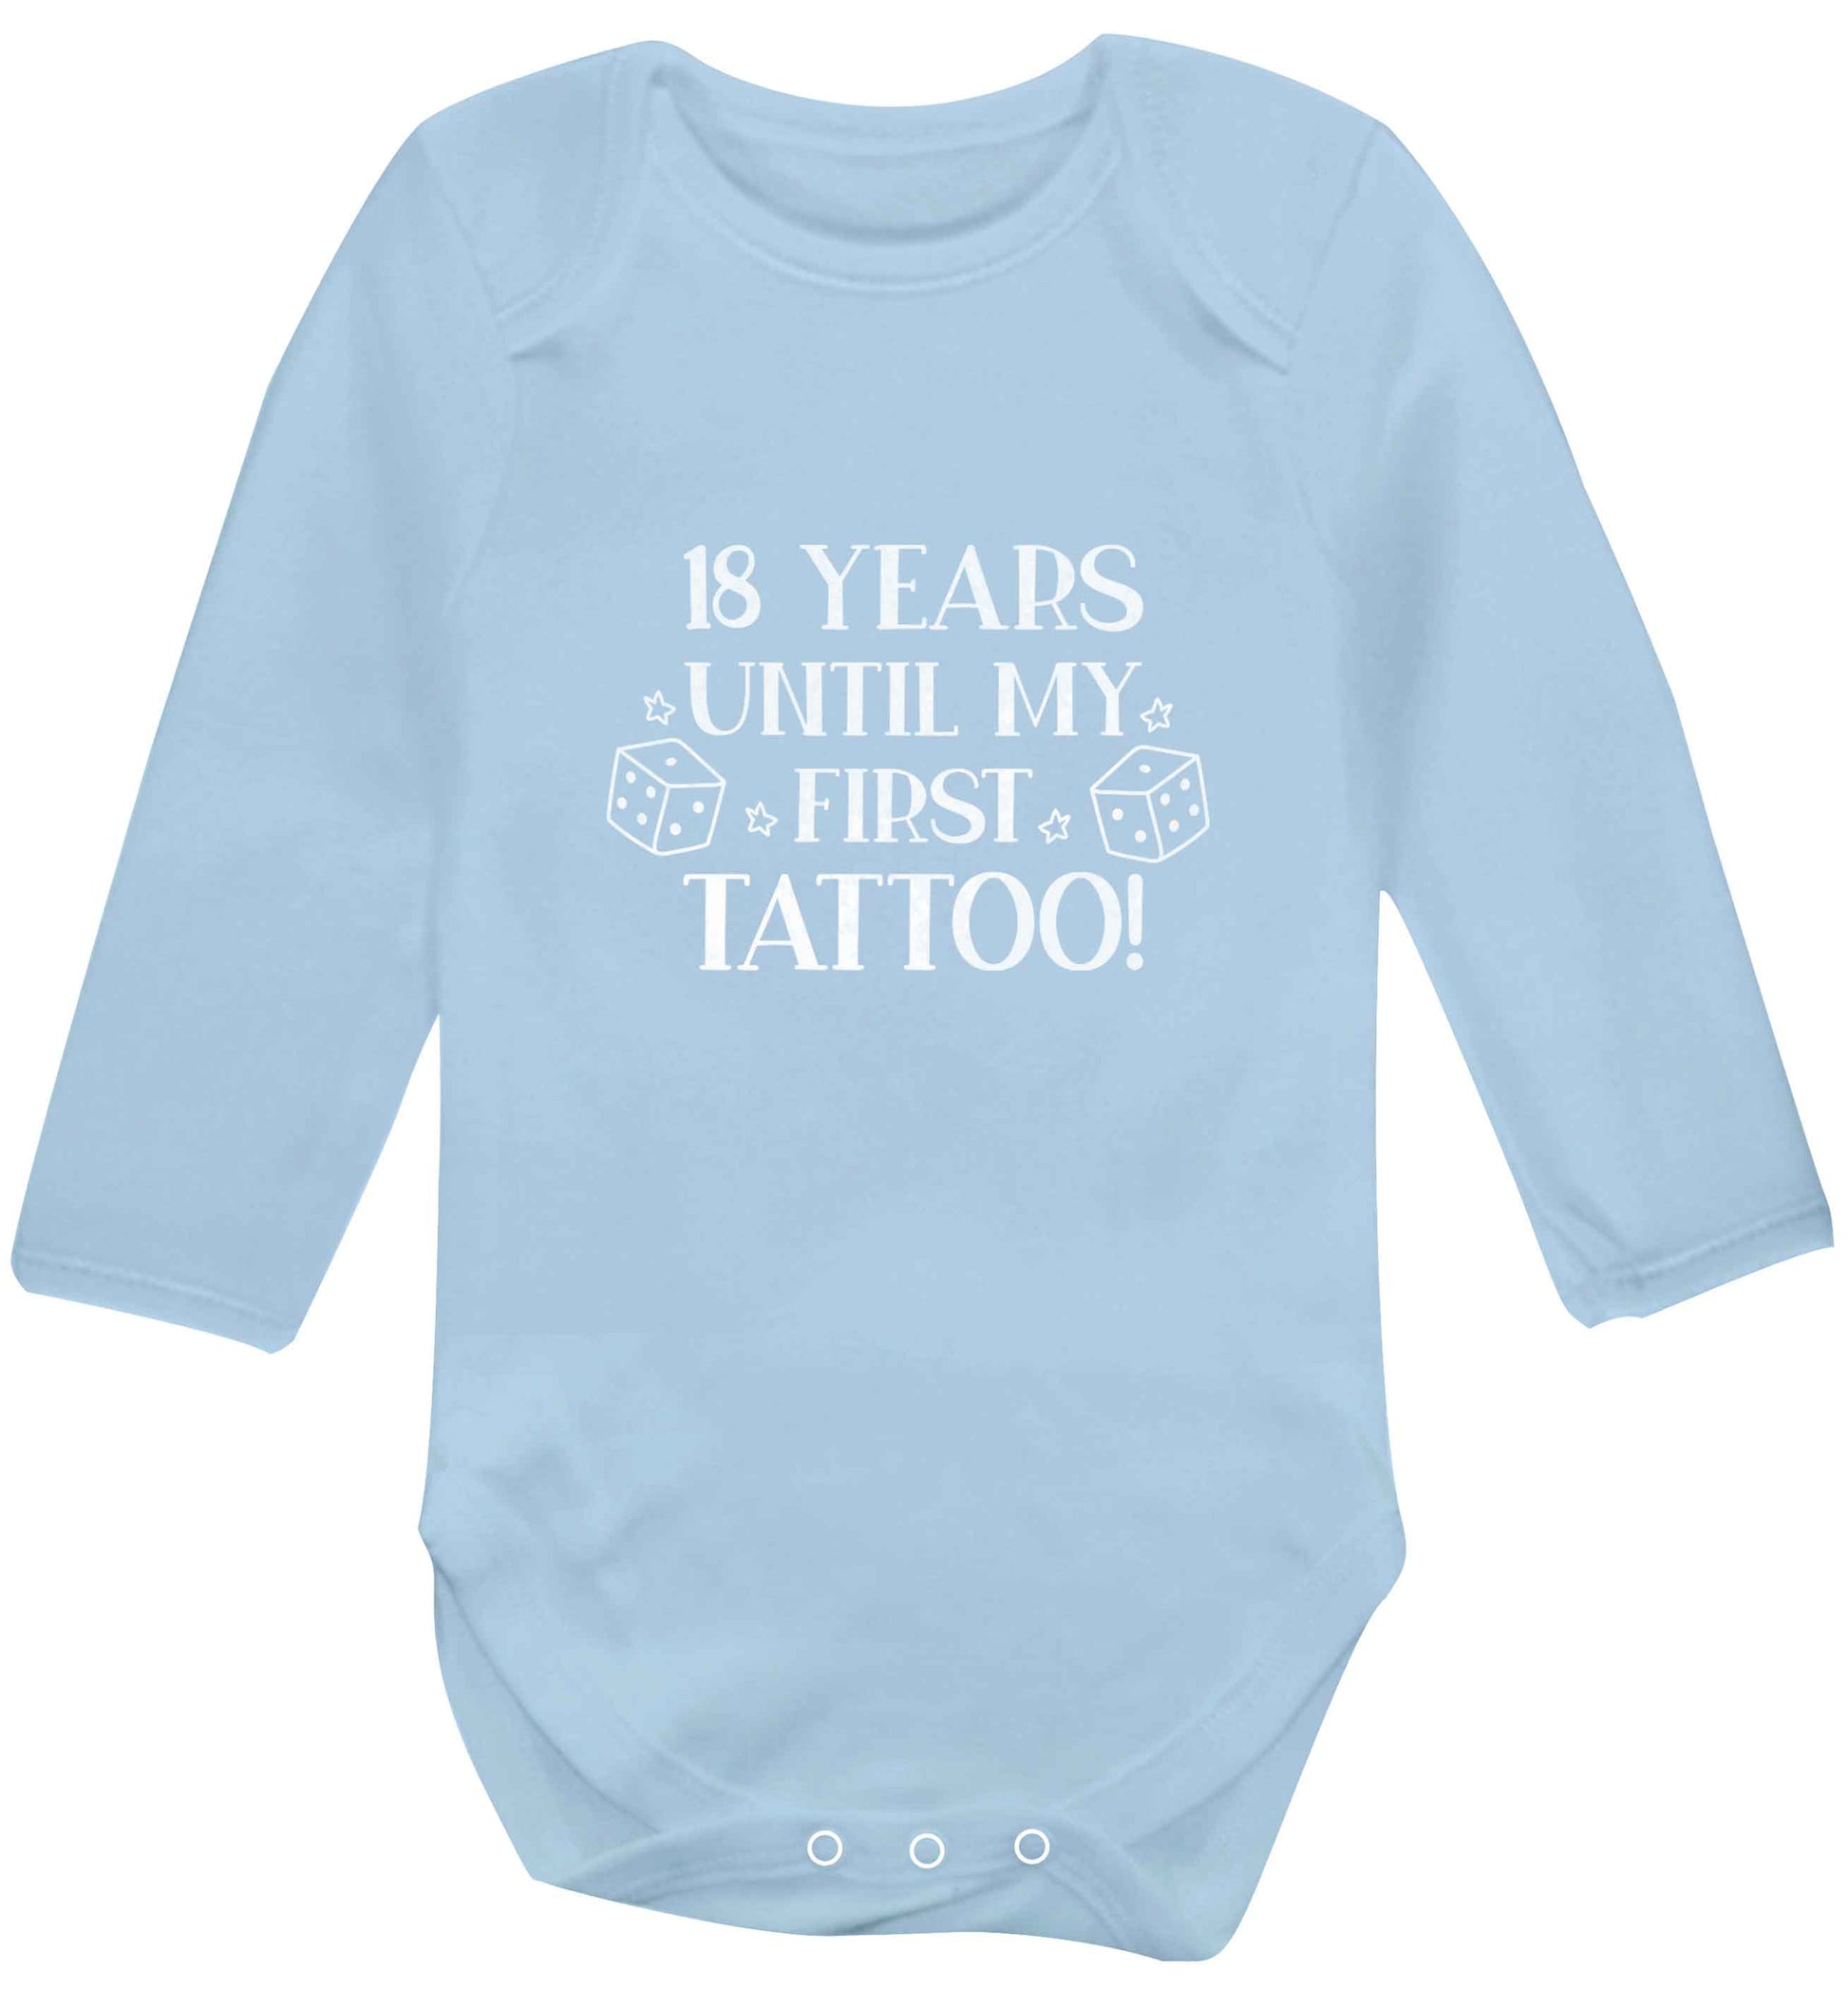 18 Years Until my First Tattoo baby vest long sleeved pale blue 6-12 months